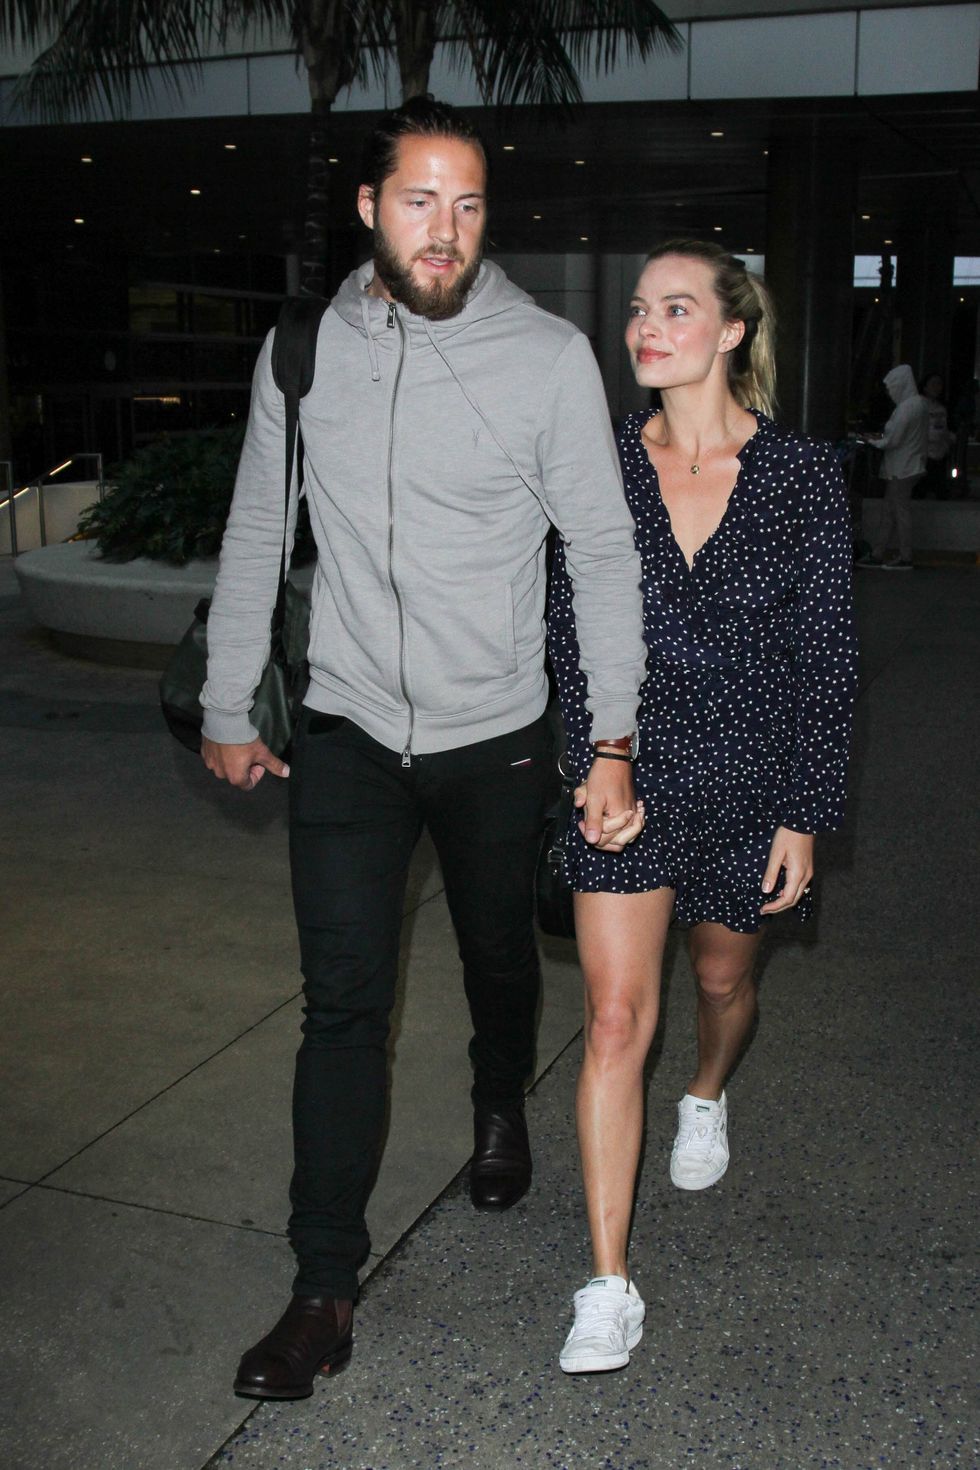 los angeles, ca january 02 margot robbie and tom ackerley are seen at lax on january 02, 2017 in los angeles, california photo by starzflybauer griffingc images